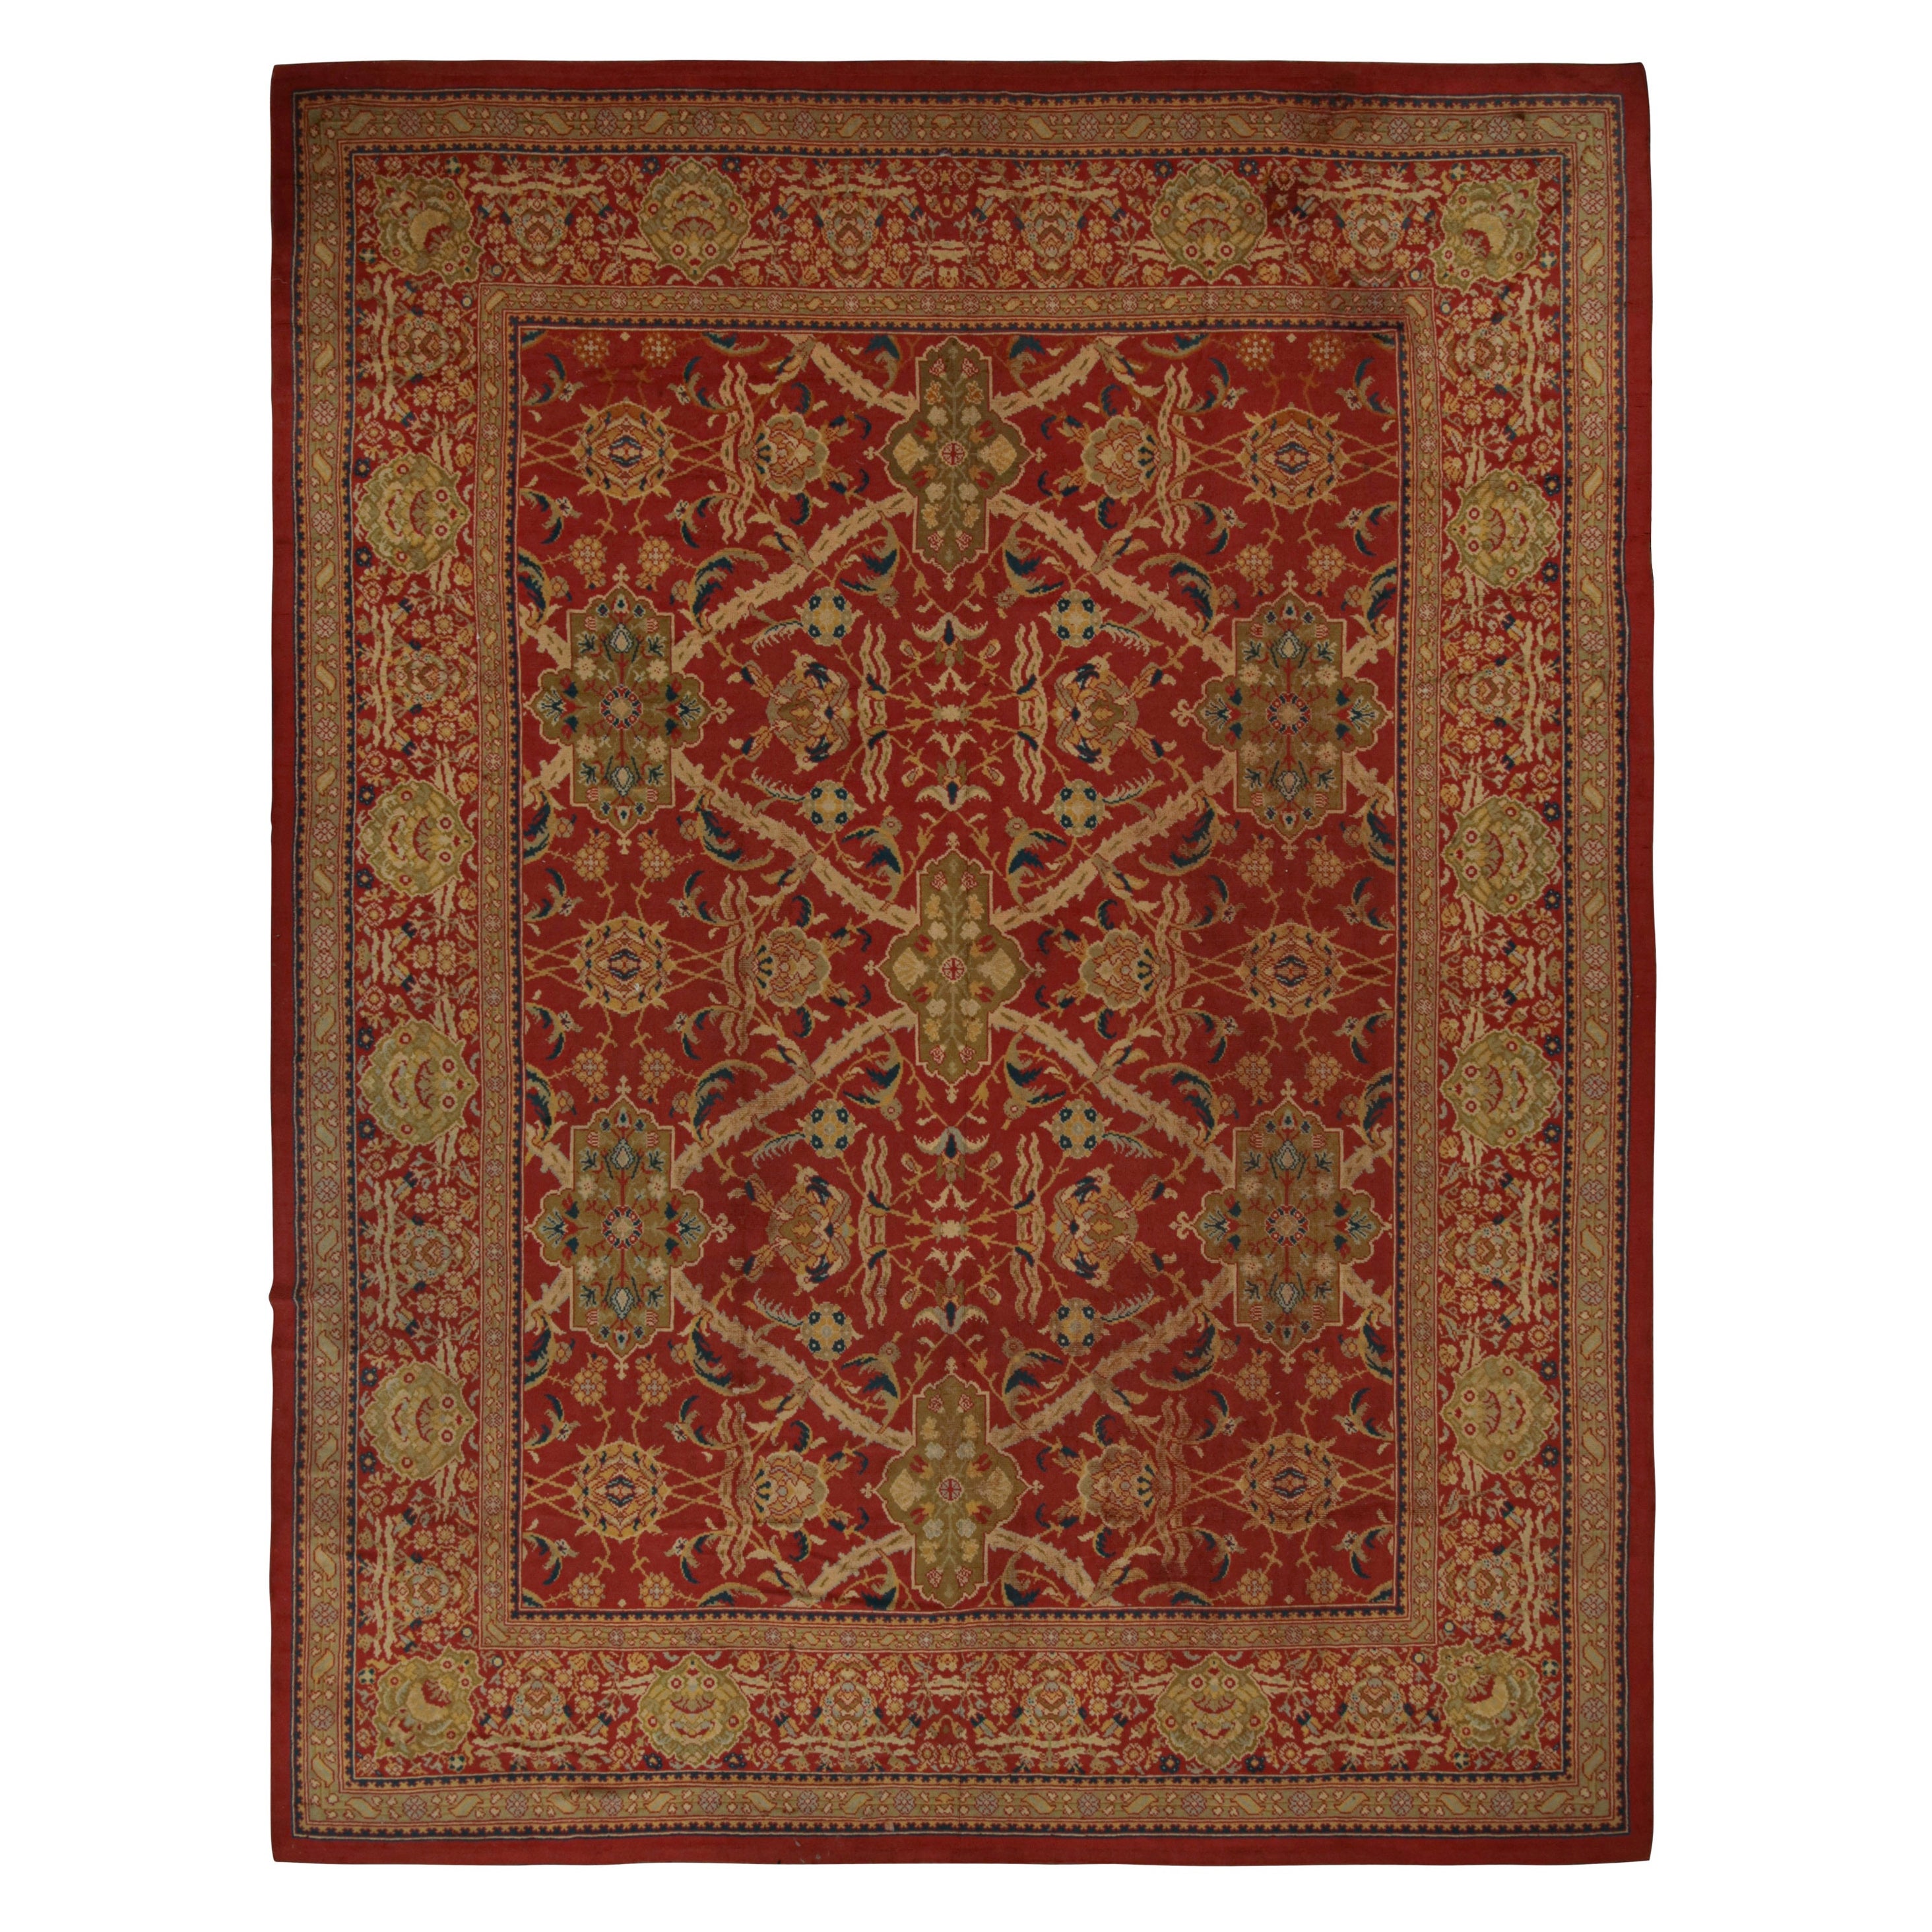 Oversized Antique Axminster Rug in Red with Floral Patterns For Sale